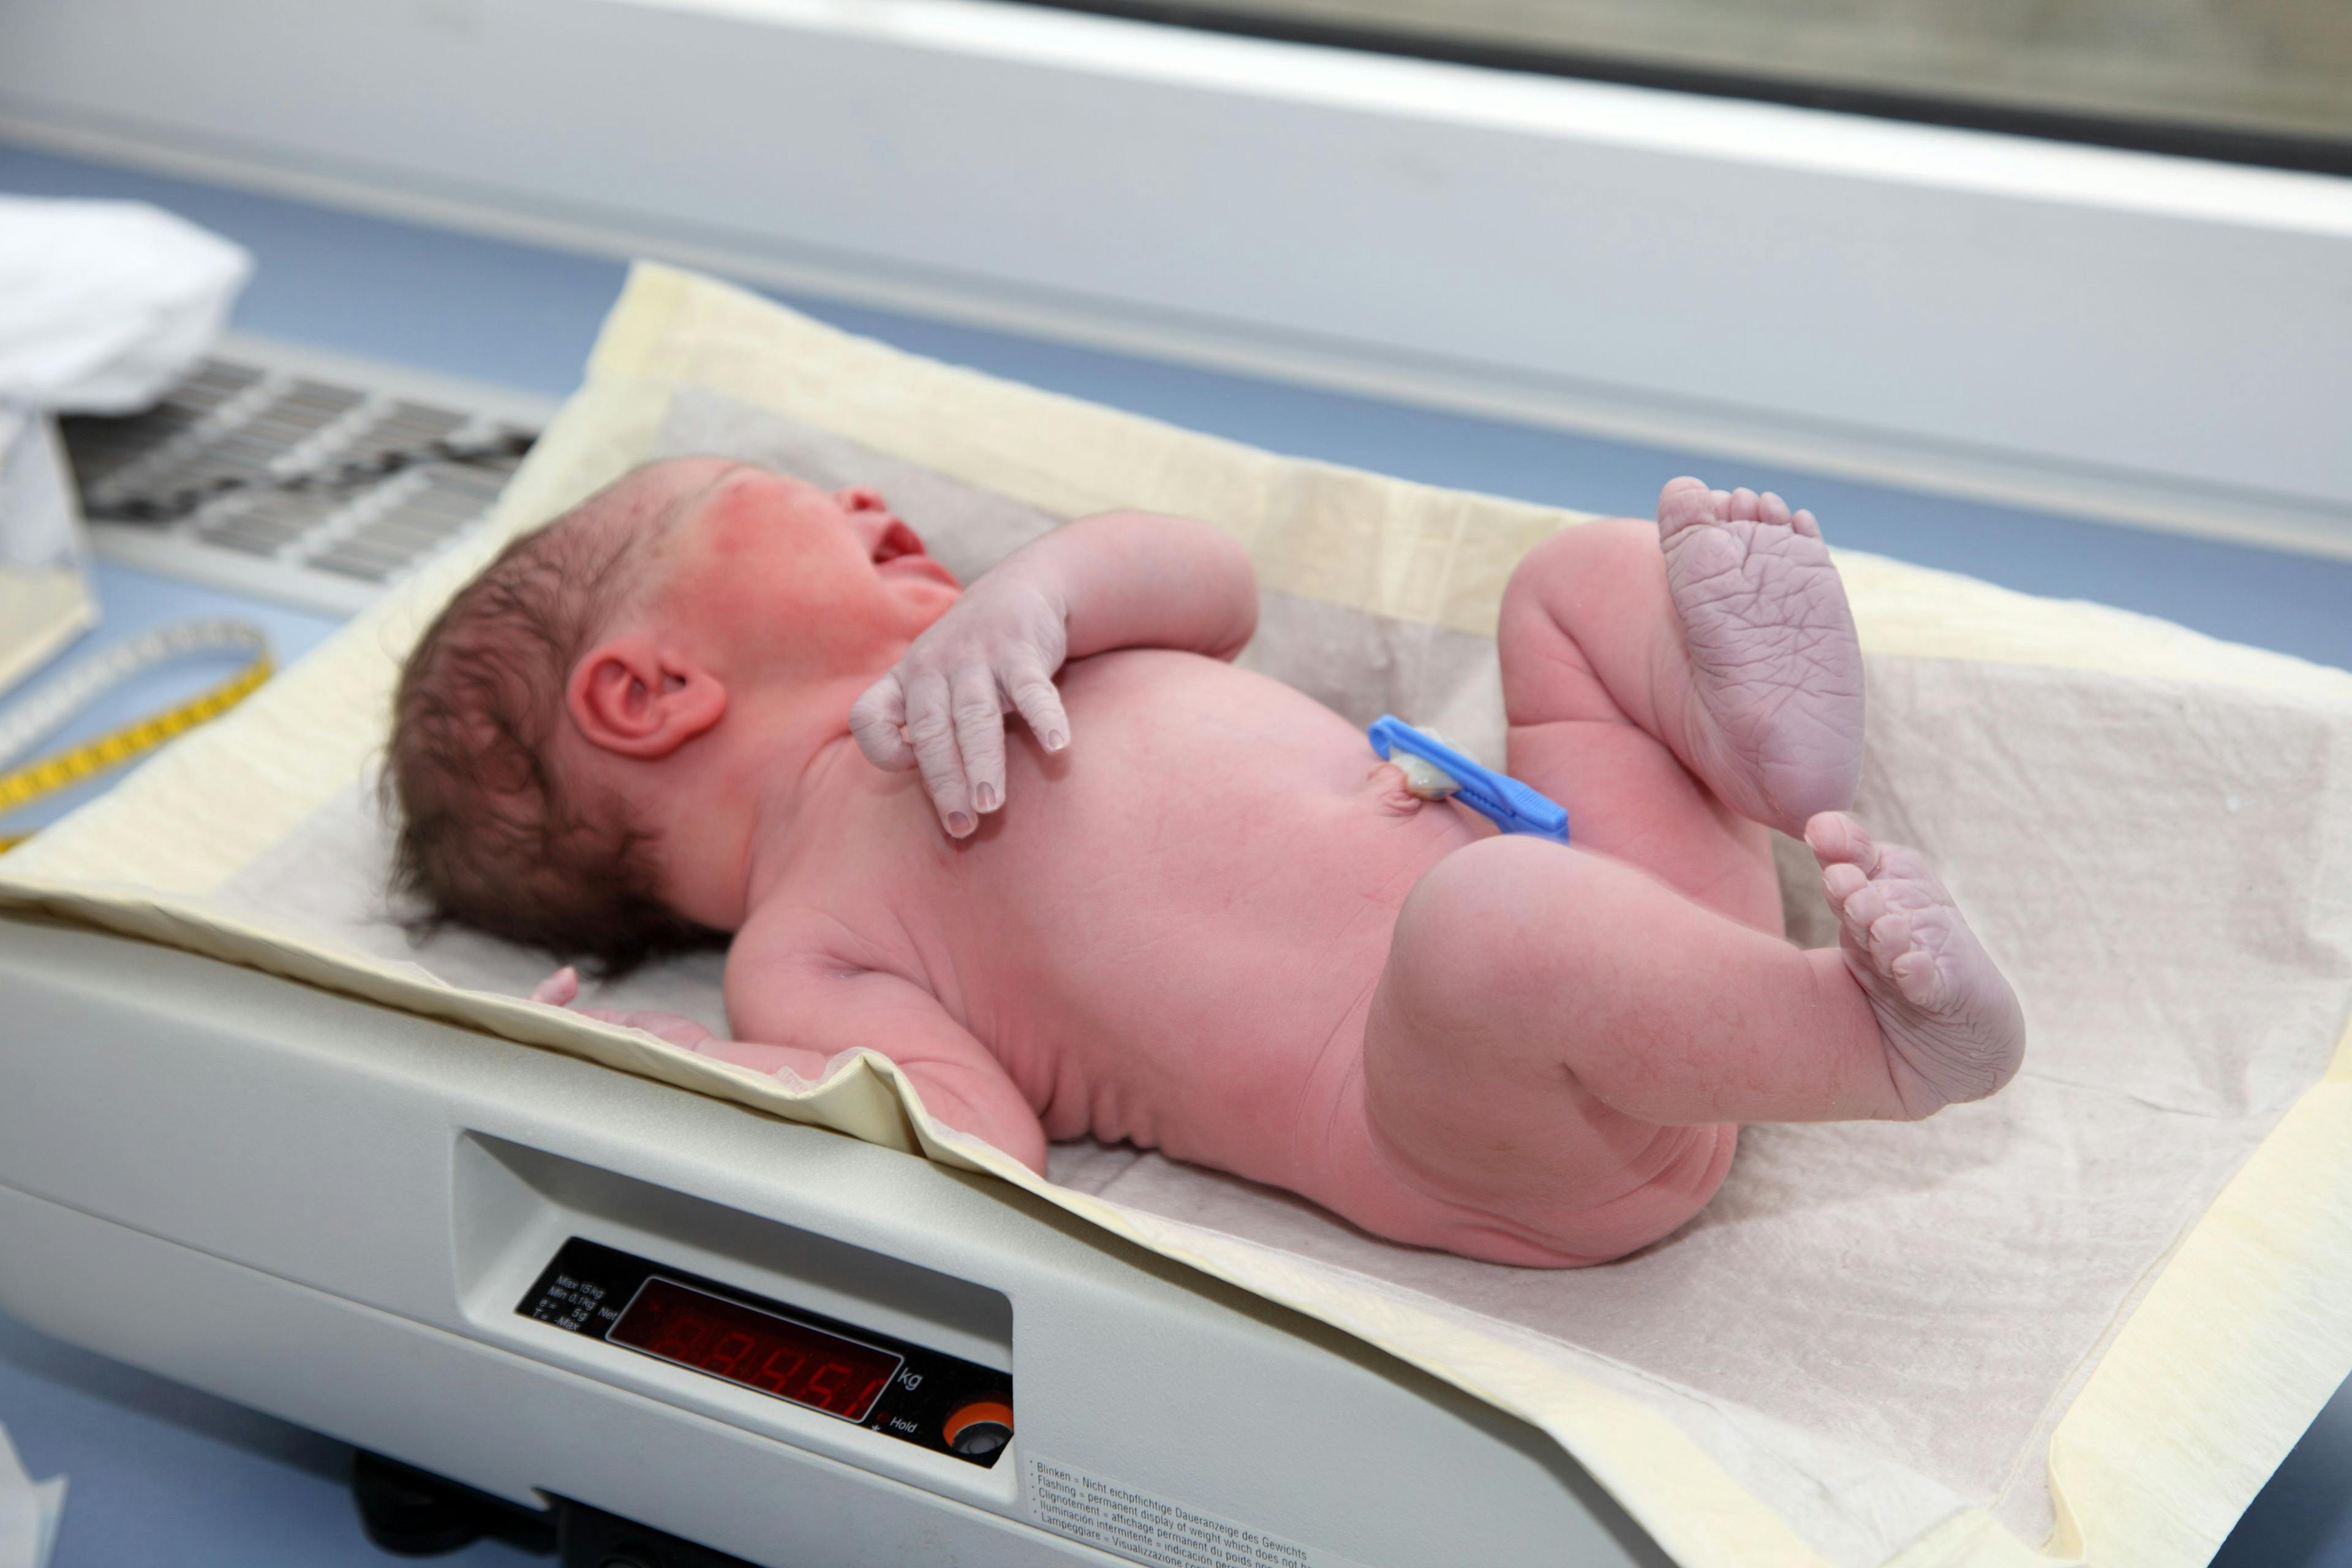 Study Results Show Probiotic Supplements Helps Form Mature Microbiome in Preterm Babies